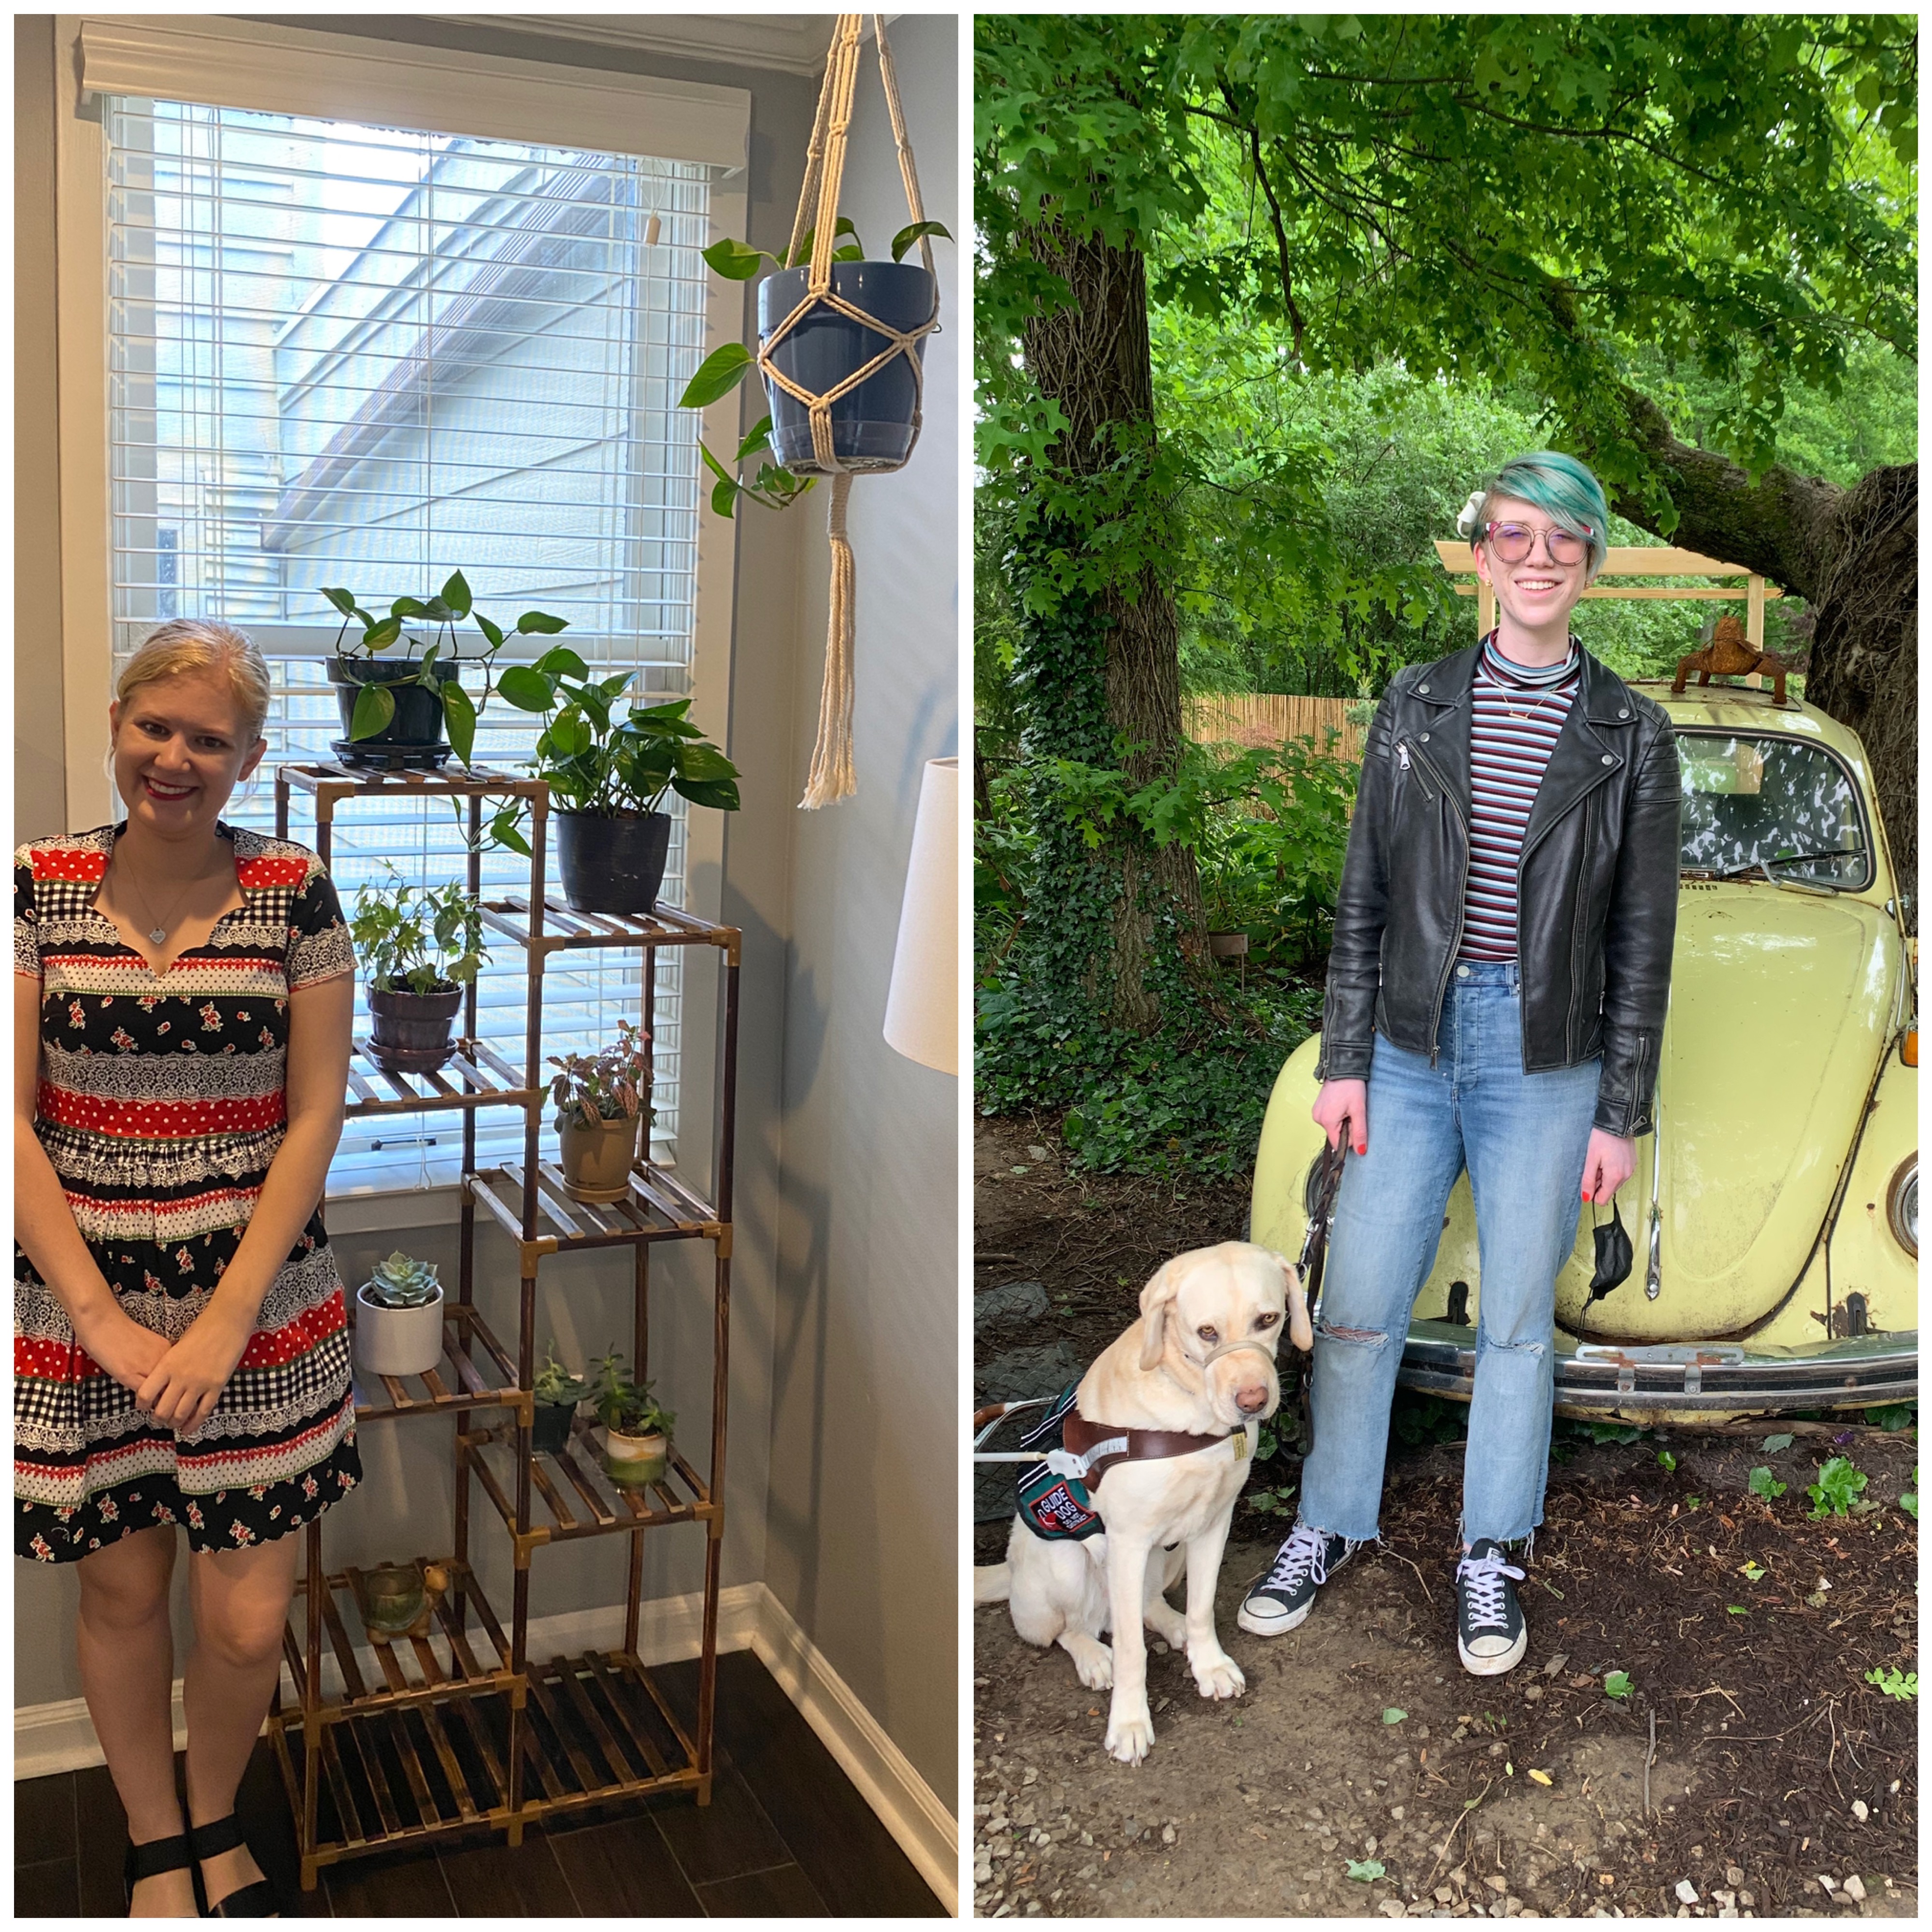 side by side collage of casey (left) and cassandra (right). casey stands by her tall, alternating shelves with beautiful green plants on them and smiles, wearing a striped dress. cassandra stands in front of a vintage yellow bug car in a plant nursery, smiling with romana, and wears a striped turtleneck with a black leather jacket and sports a teal pixie cut